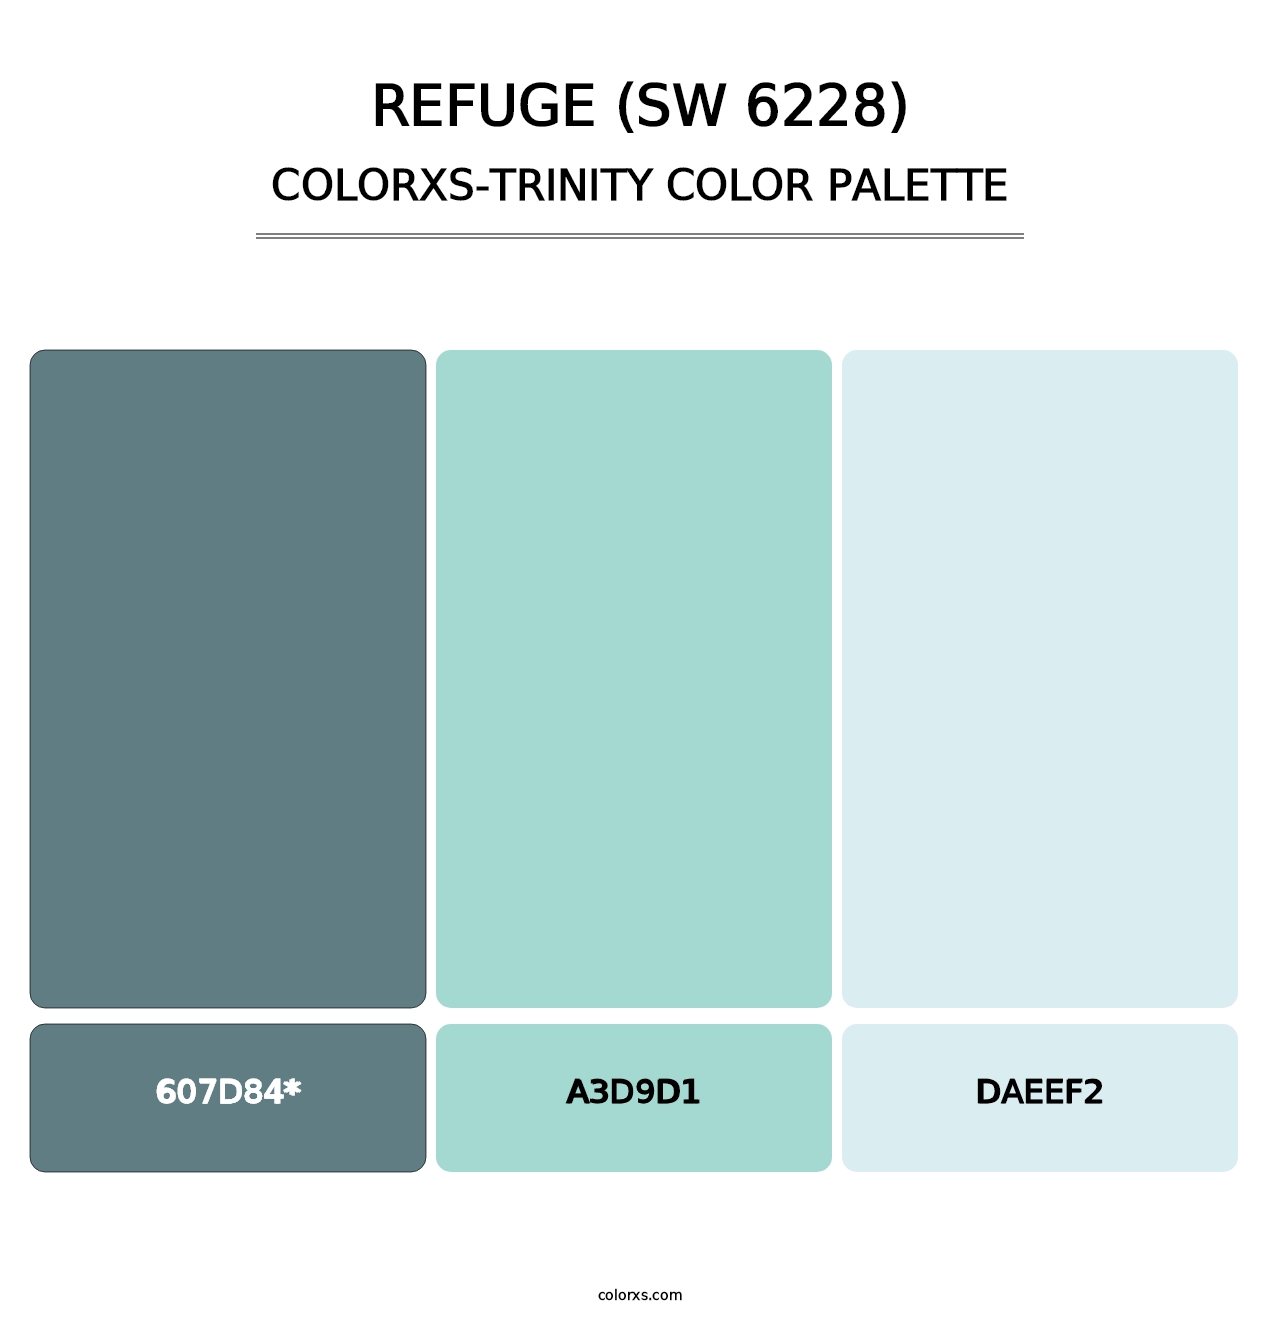 Refuge (SW 6228) - Colorxs Trinity Palette